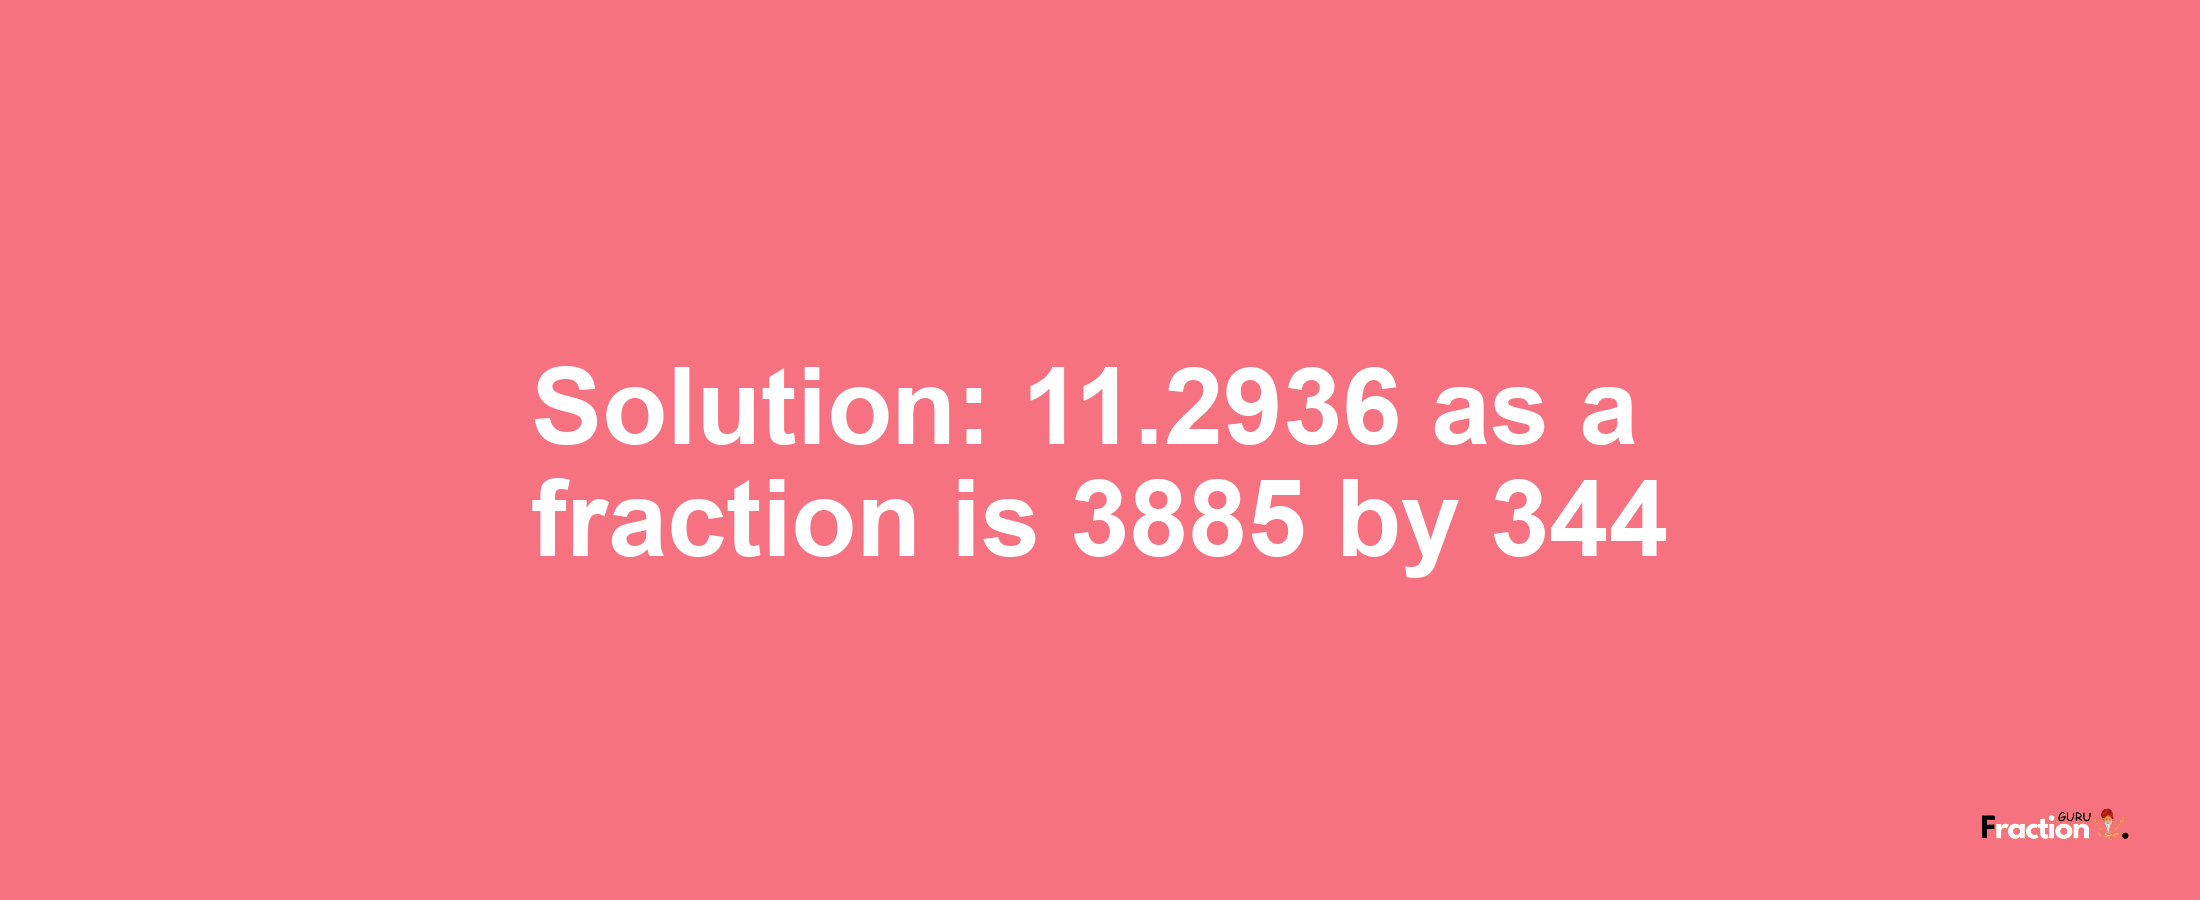 Solution:11.2936 as a fraction is 3885/344